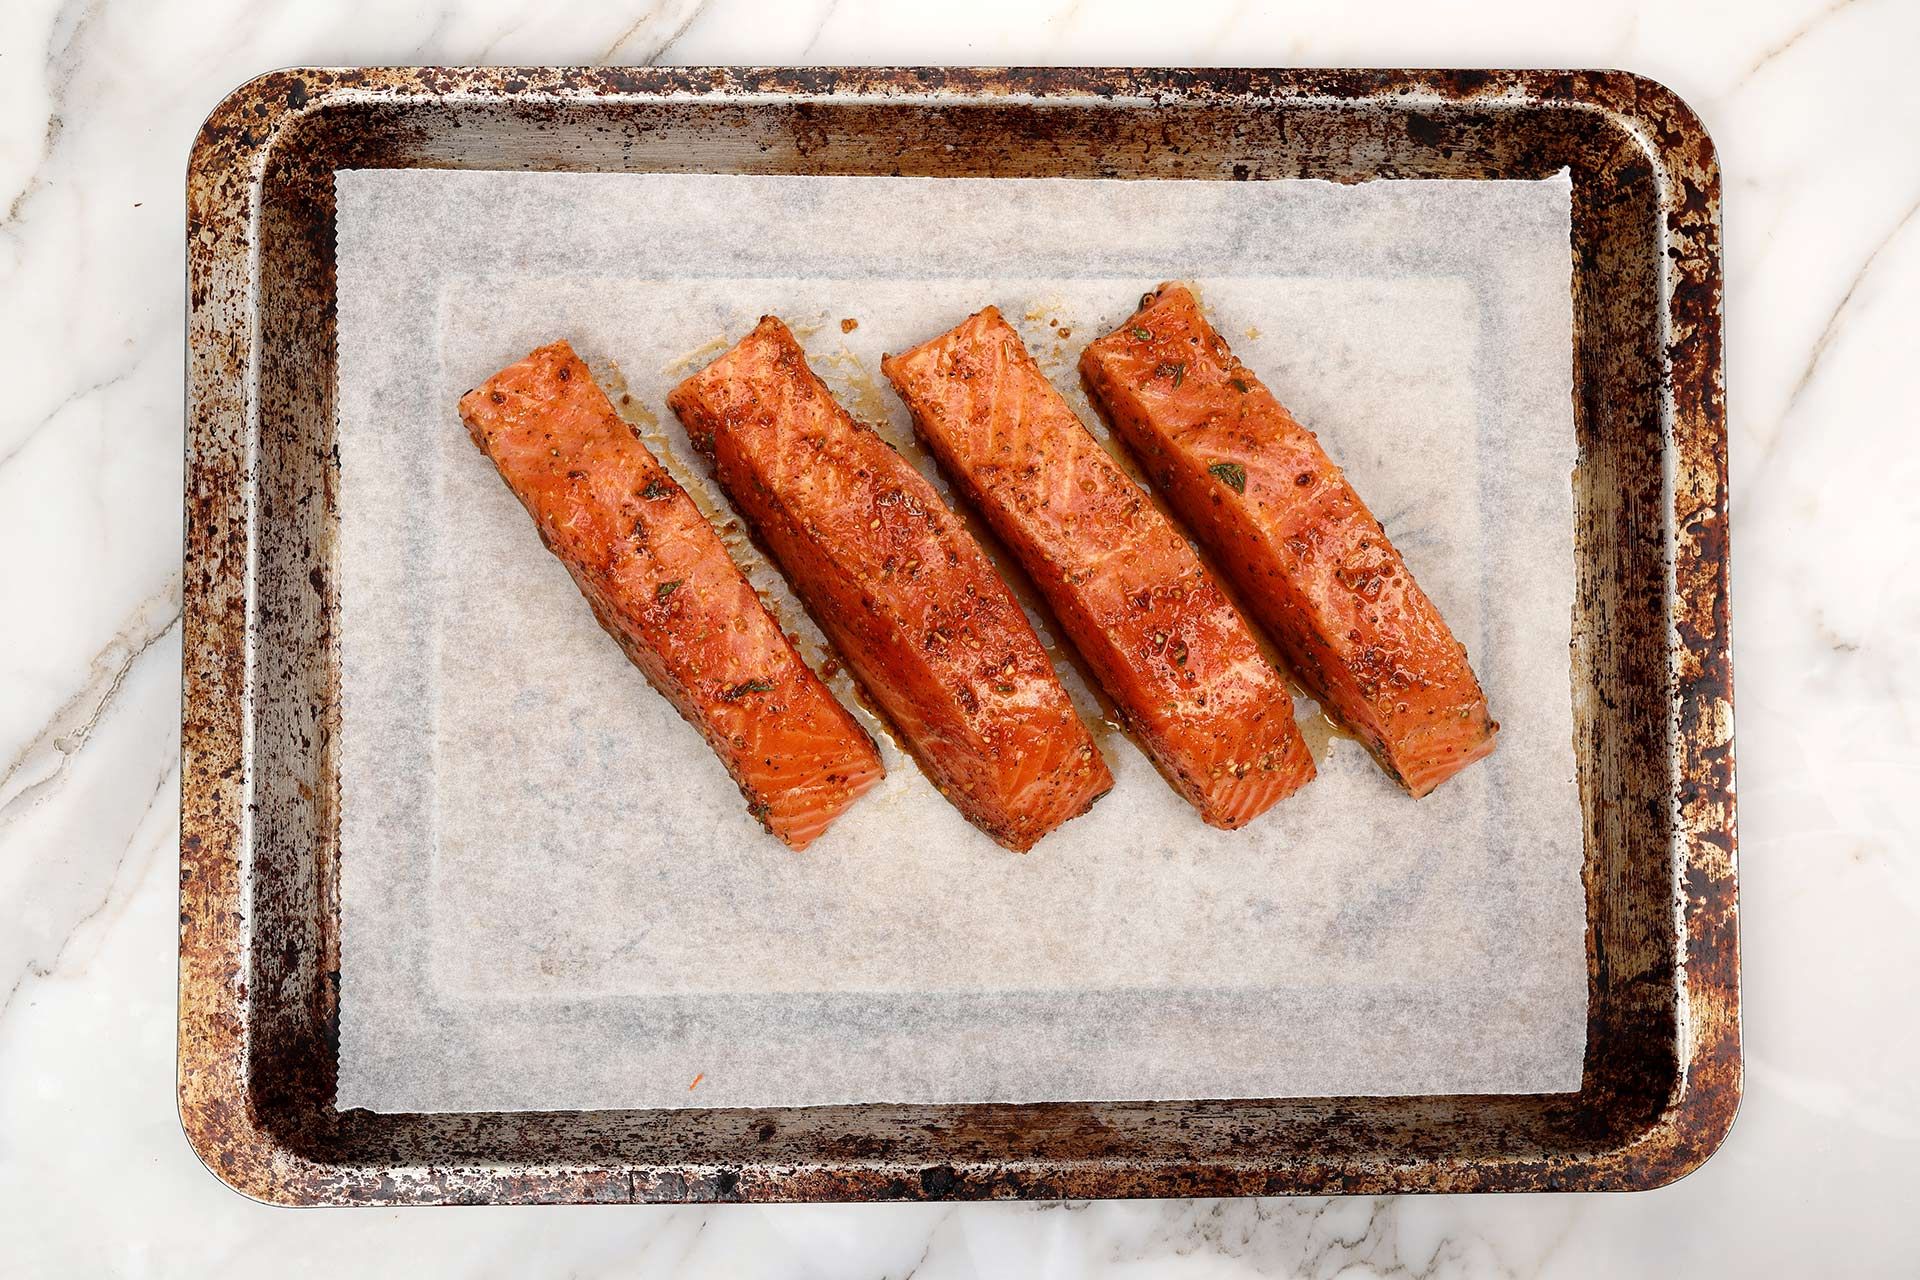 Oven-Baked Salmon Recipe step 5